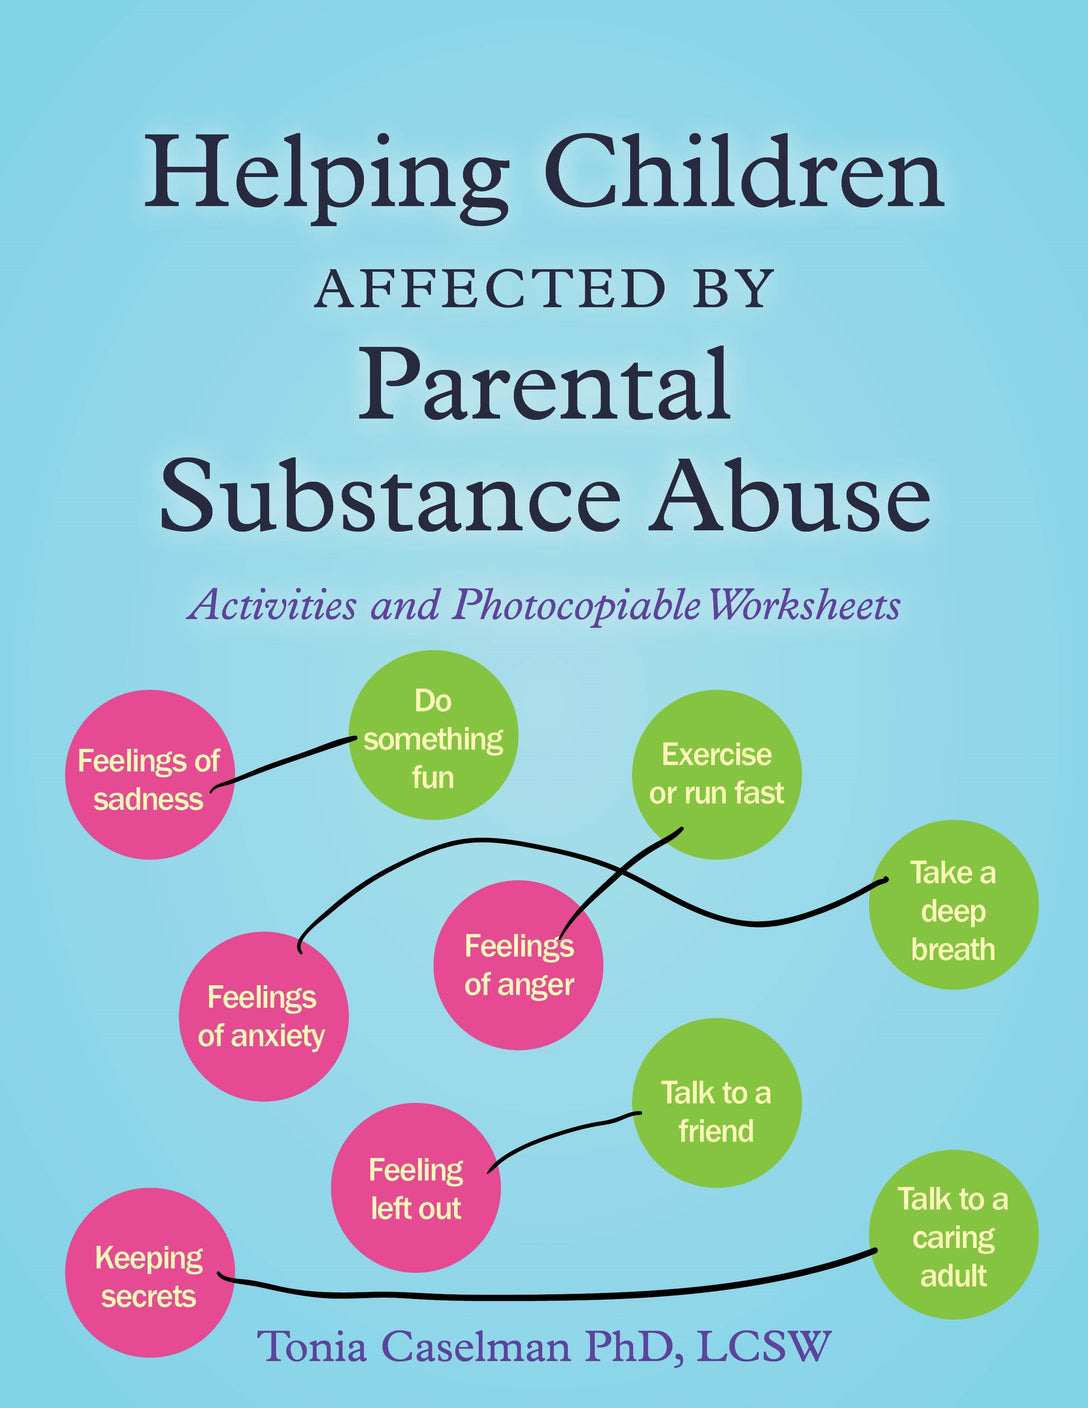 Helping Children Affected by Parental Substance Abuse by Tonia Caselman